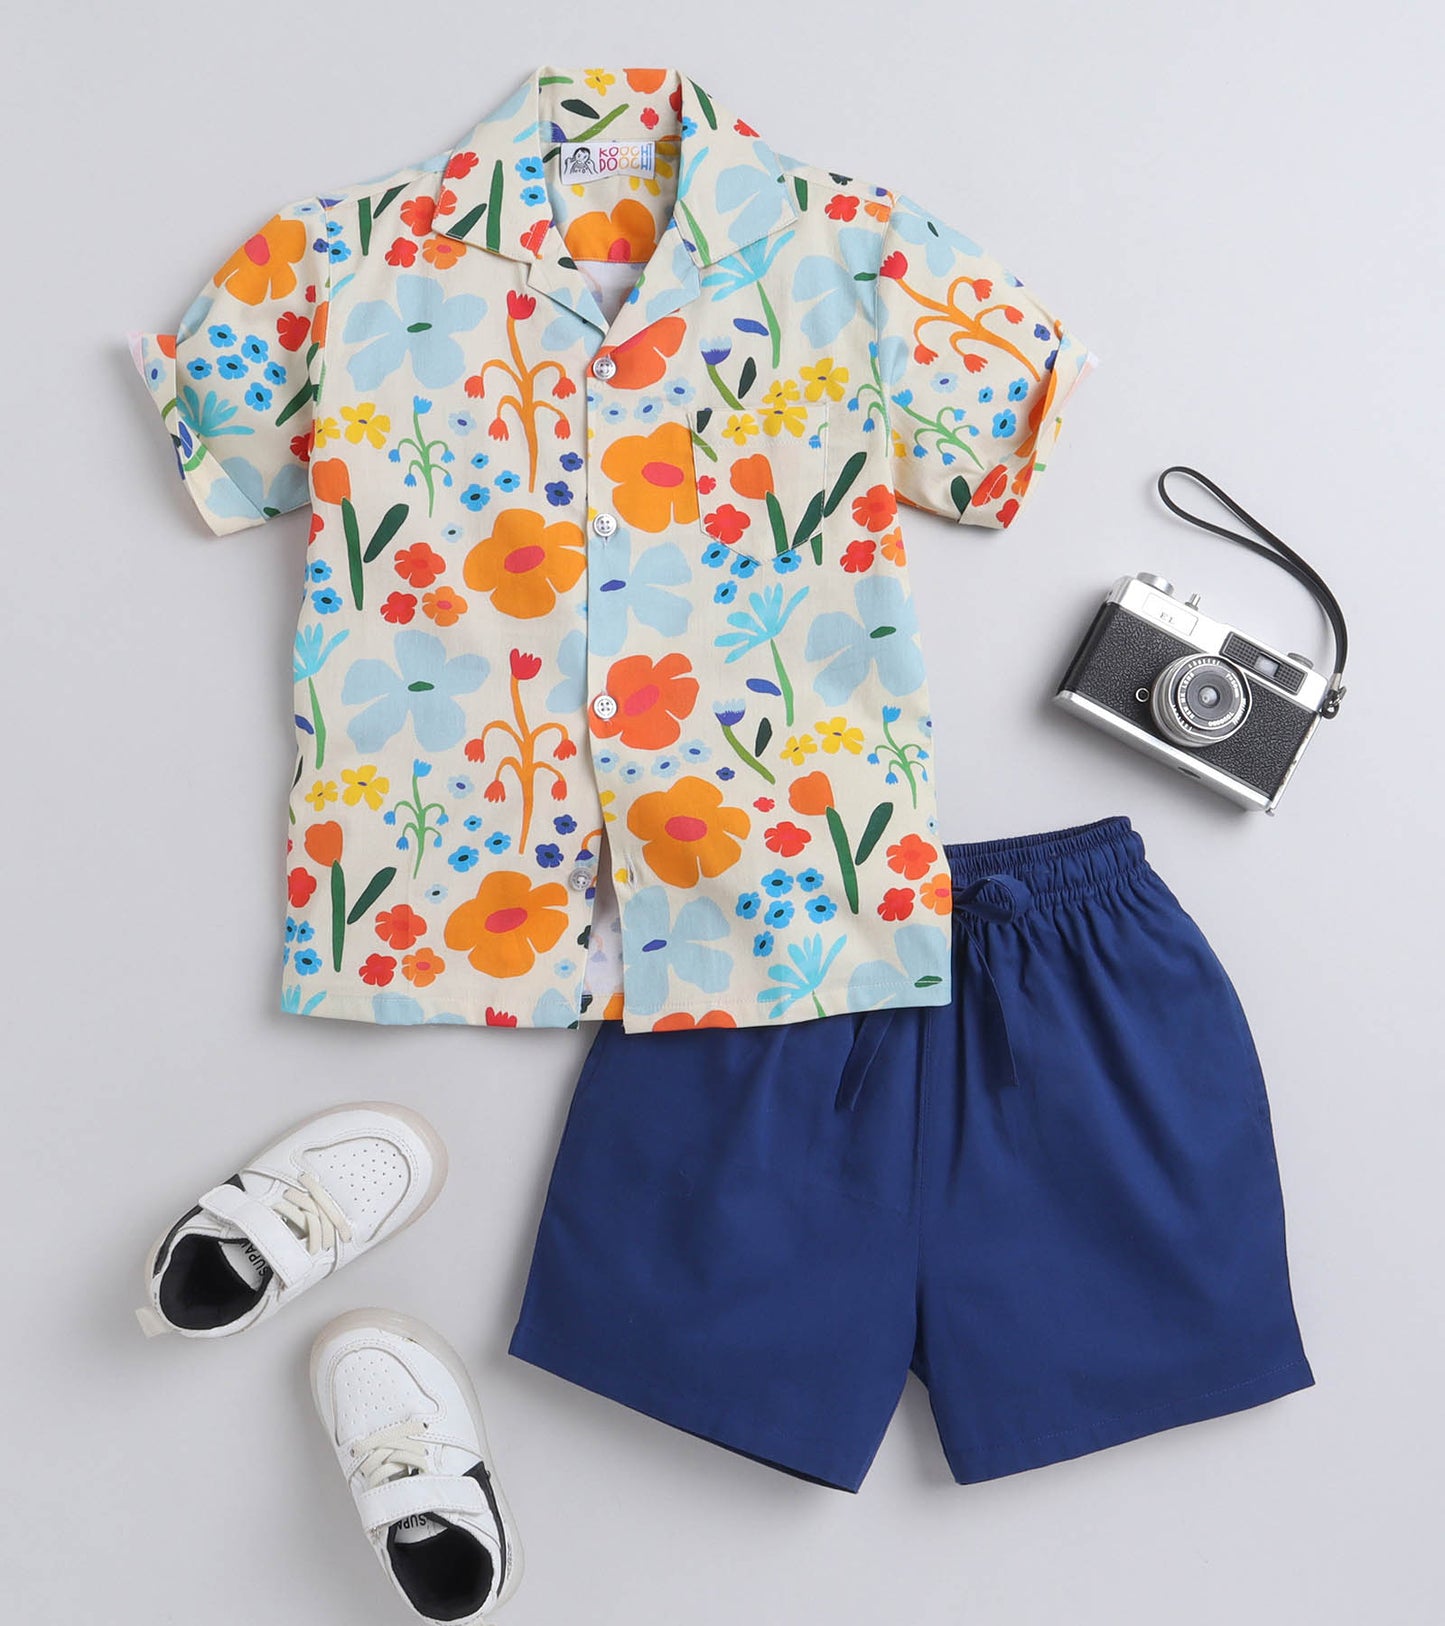 Spring Spell Digital printed Shirt with Blue solid Shorts